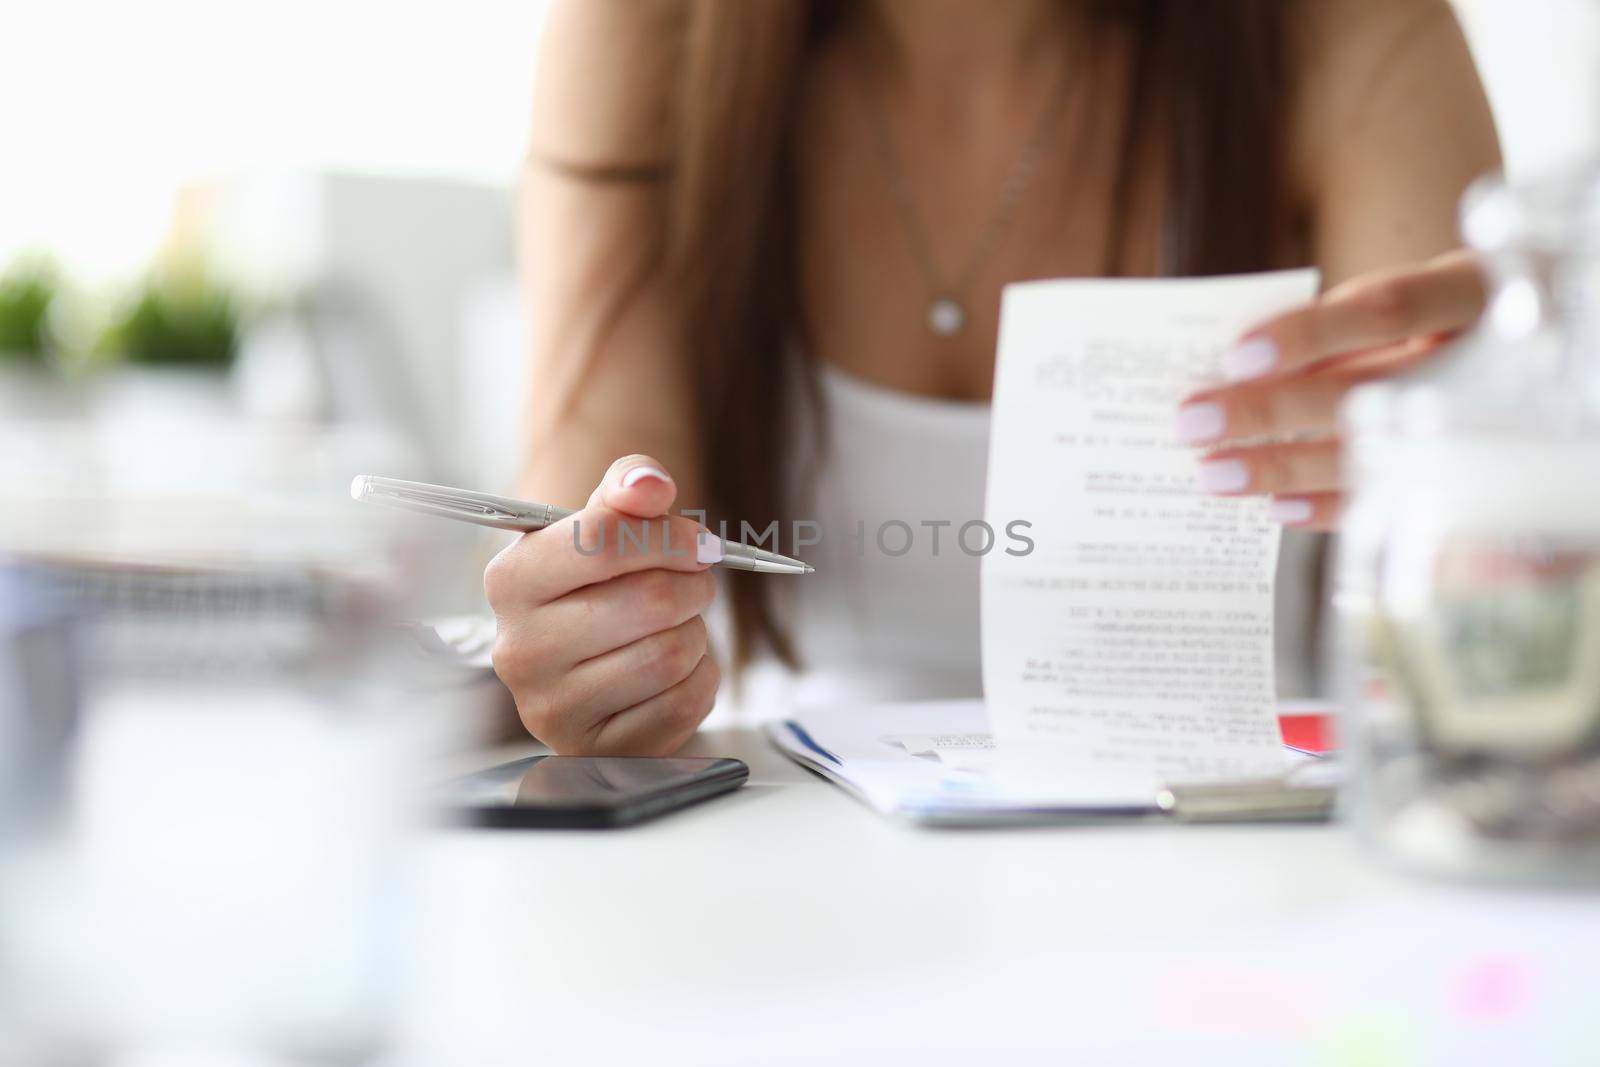 Focus on tender hands of businesswoman sitting indoors with metallic silver pen and important tablet with significant business documents. Office concept. Blurred background